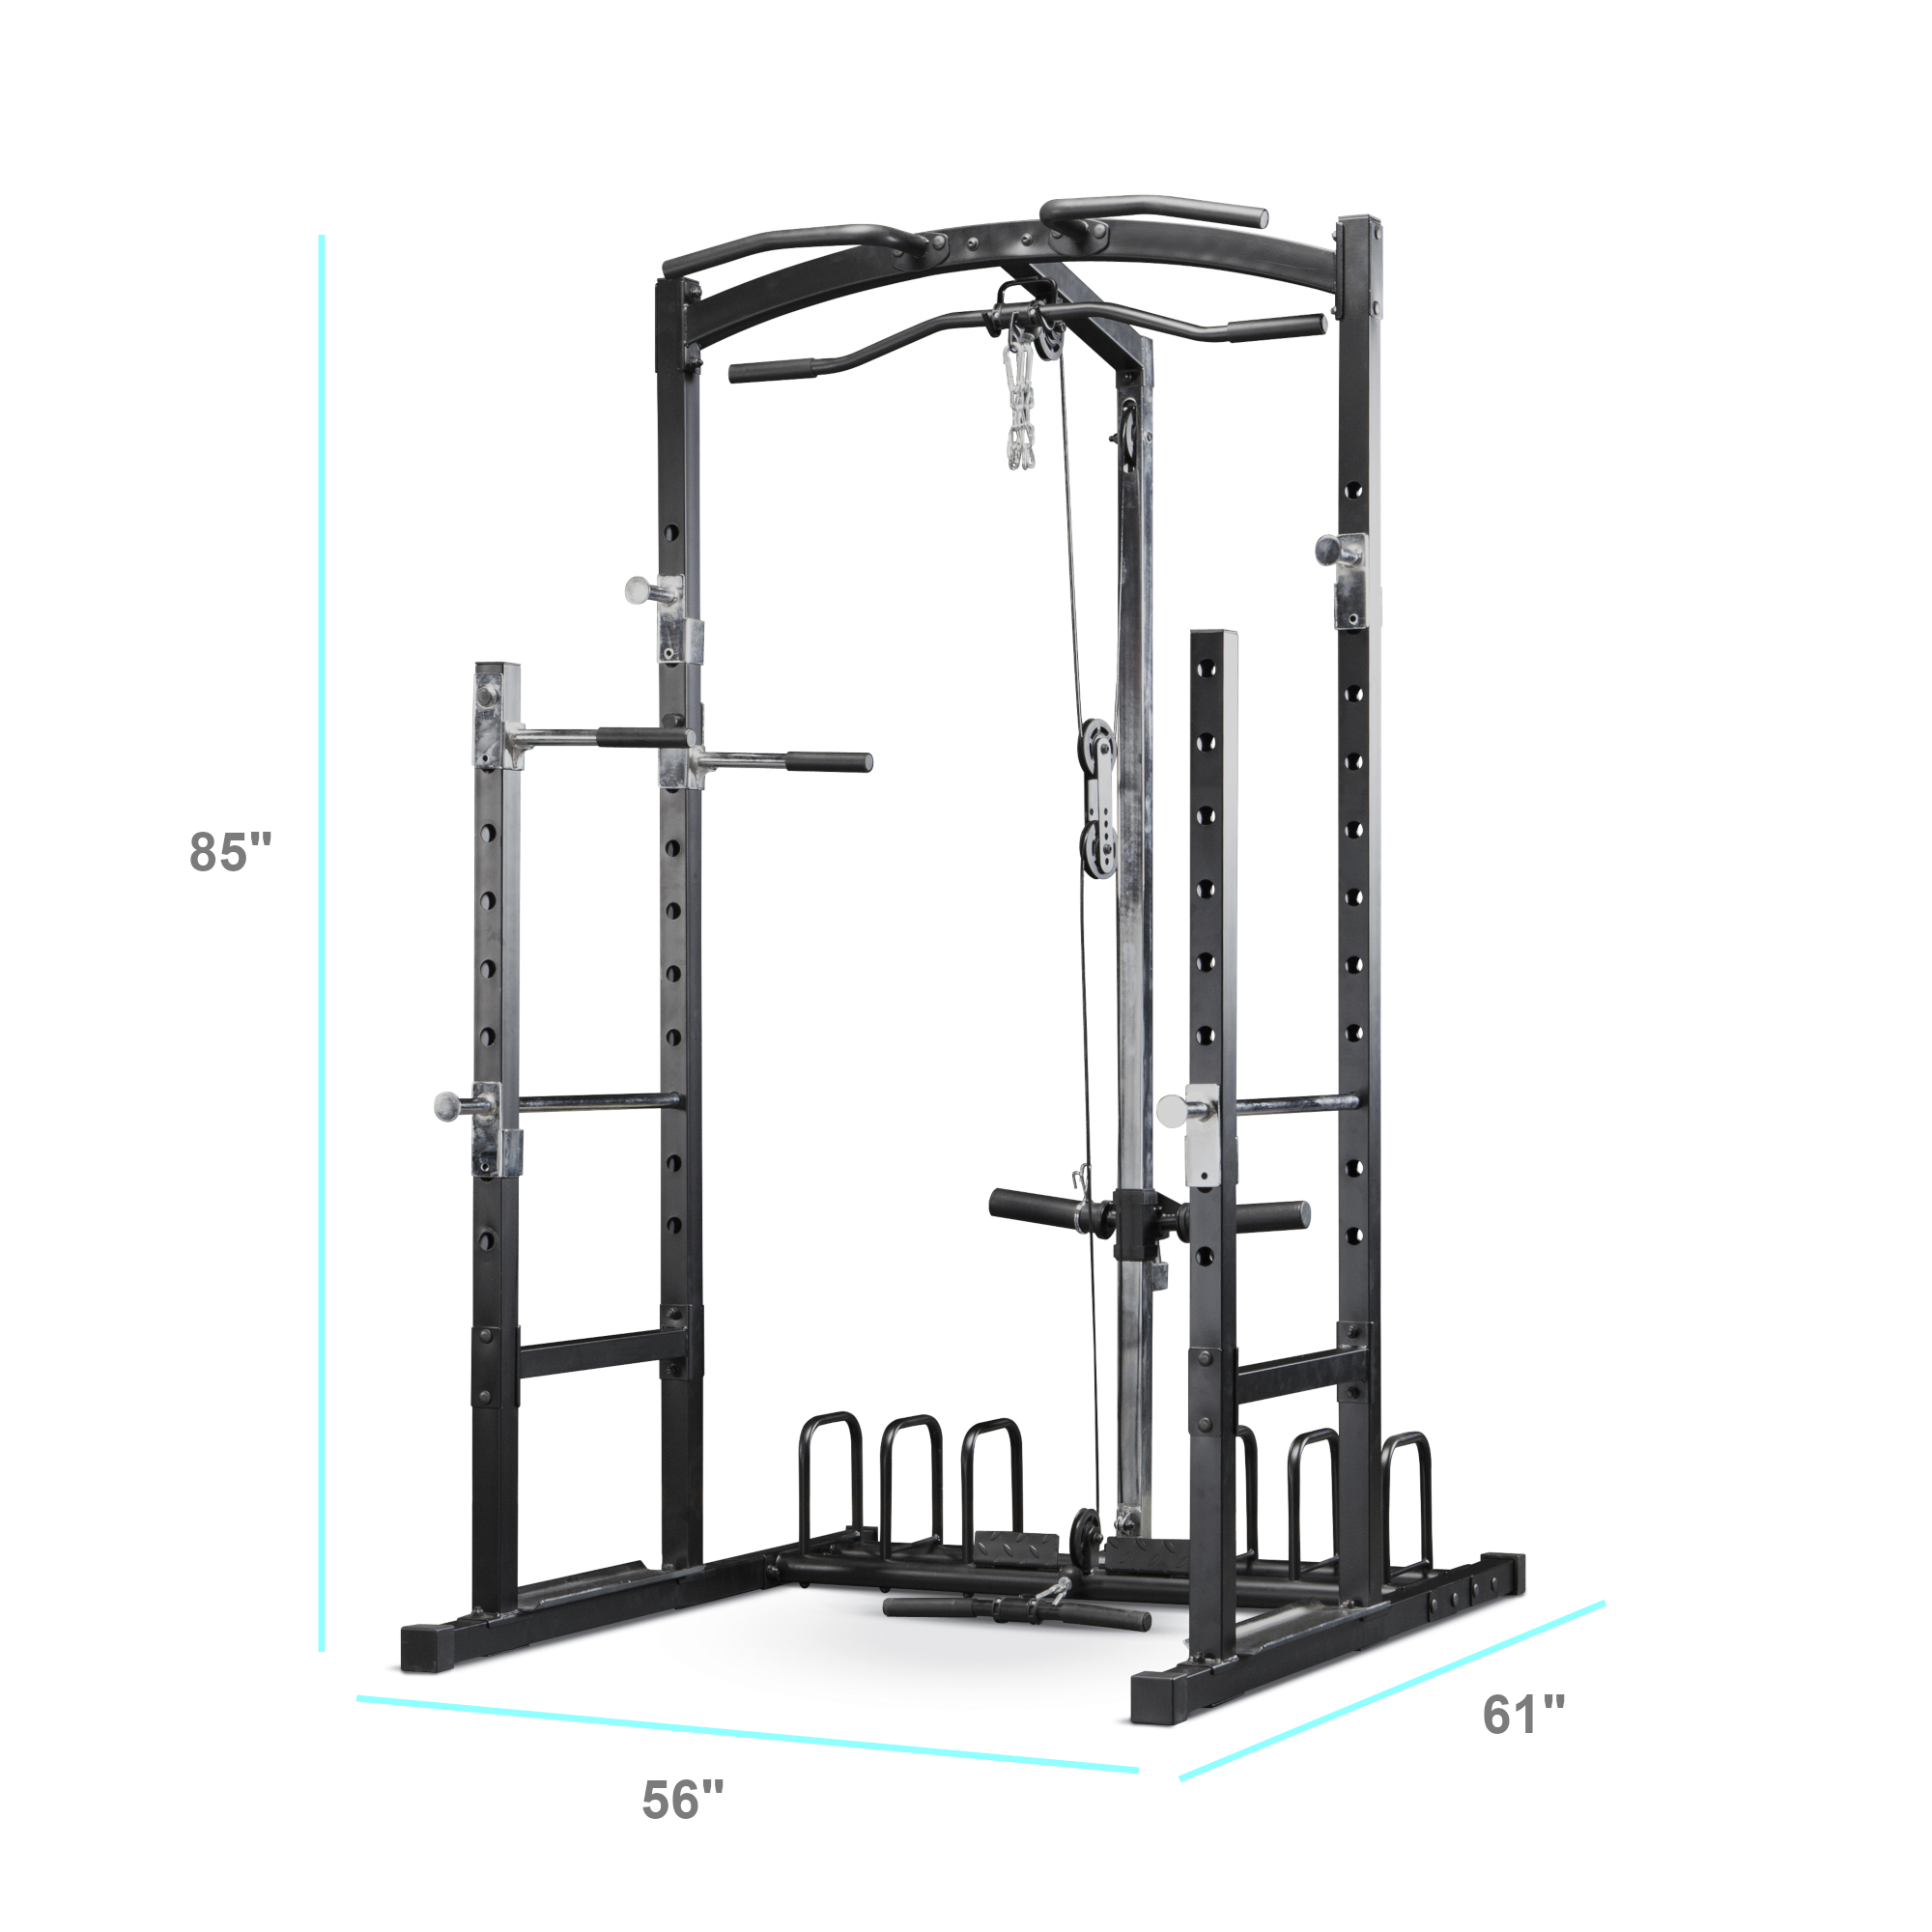 Marcy Home Gym Cage System MWM-7041 - image 4 of 12